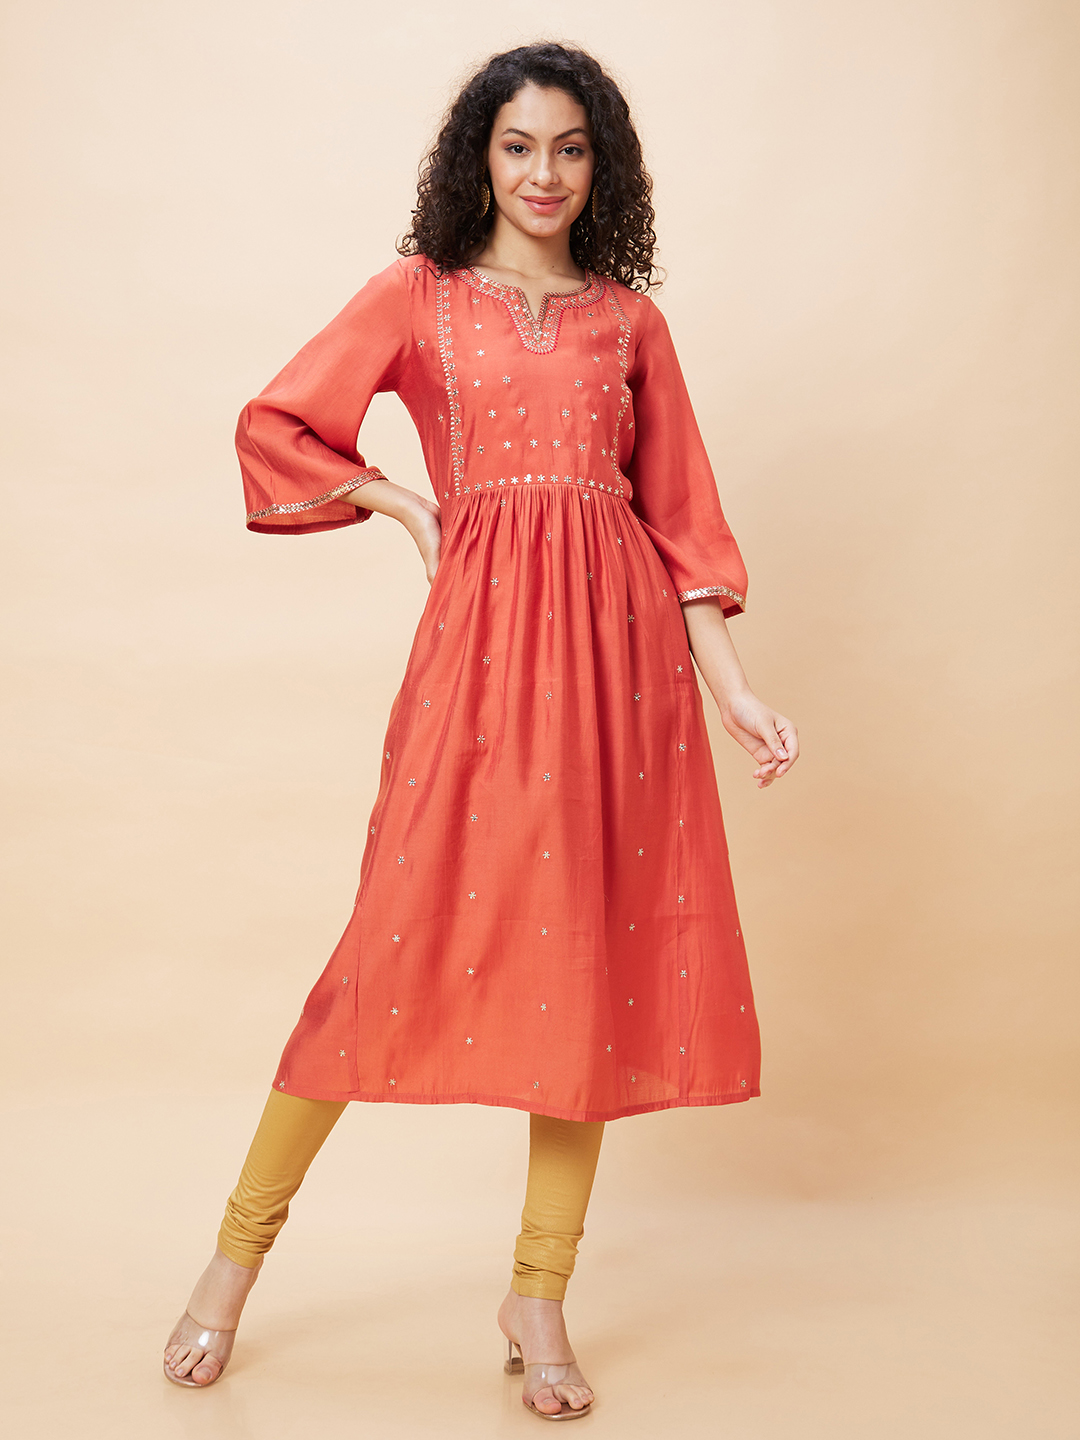 Globus Women Rust Floral Embroidered Flared Sleeves Round Neck Festive A-Line Kurta